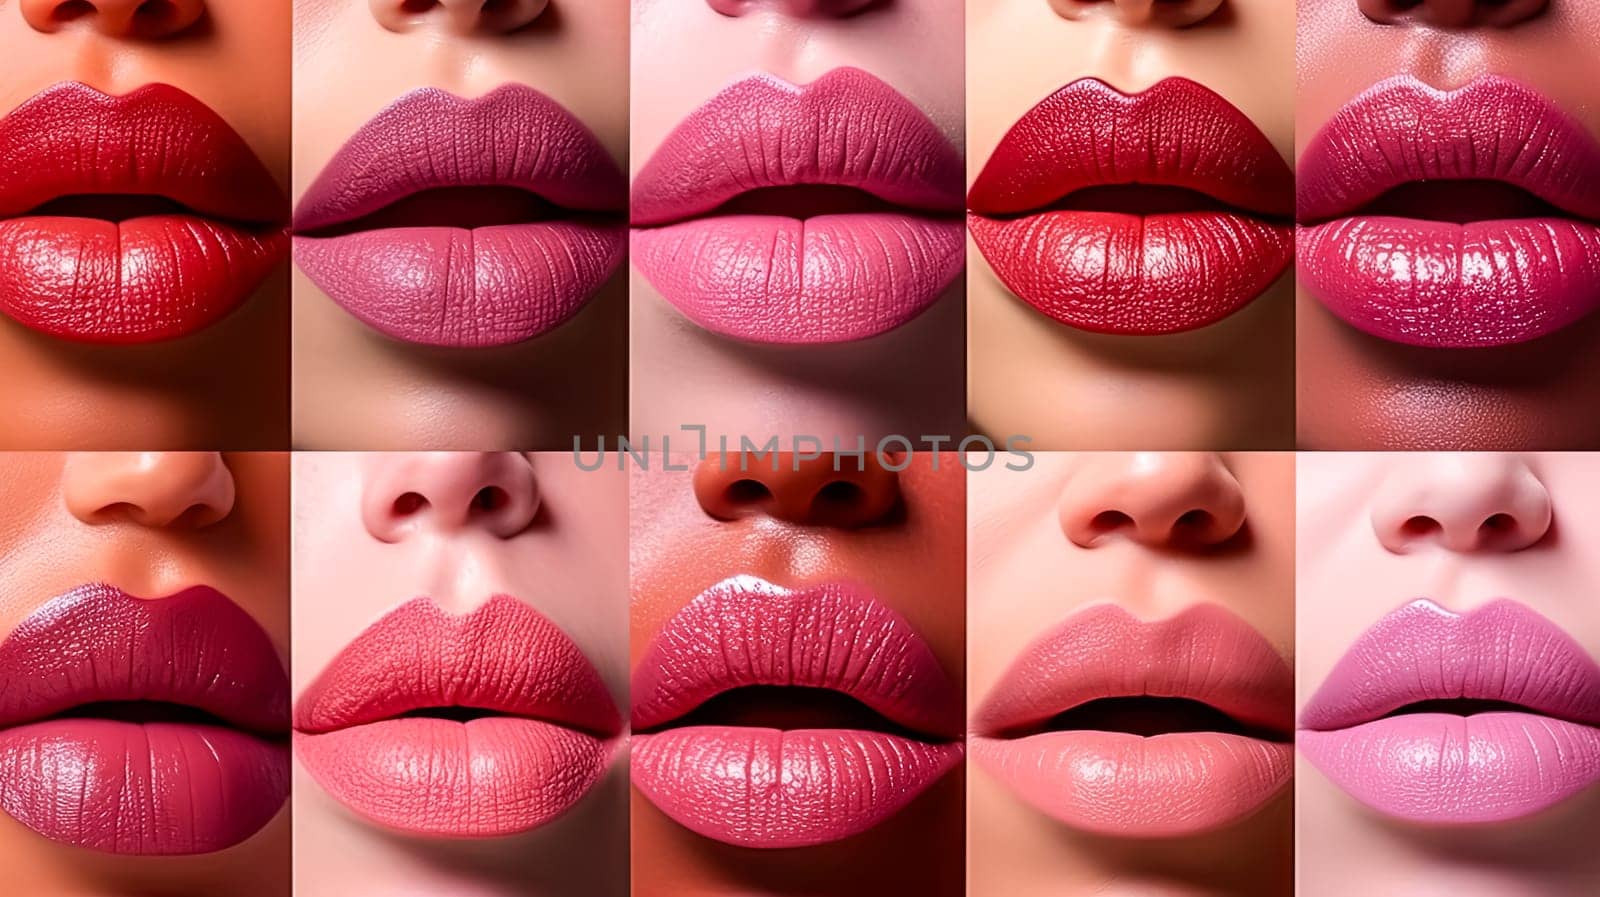 A row of lips with different shades of pink lipstick. The lips are arranged in a grid pattern, with each row and column featuring a different shade of pink. Concept of variety and diversity